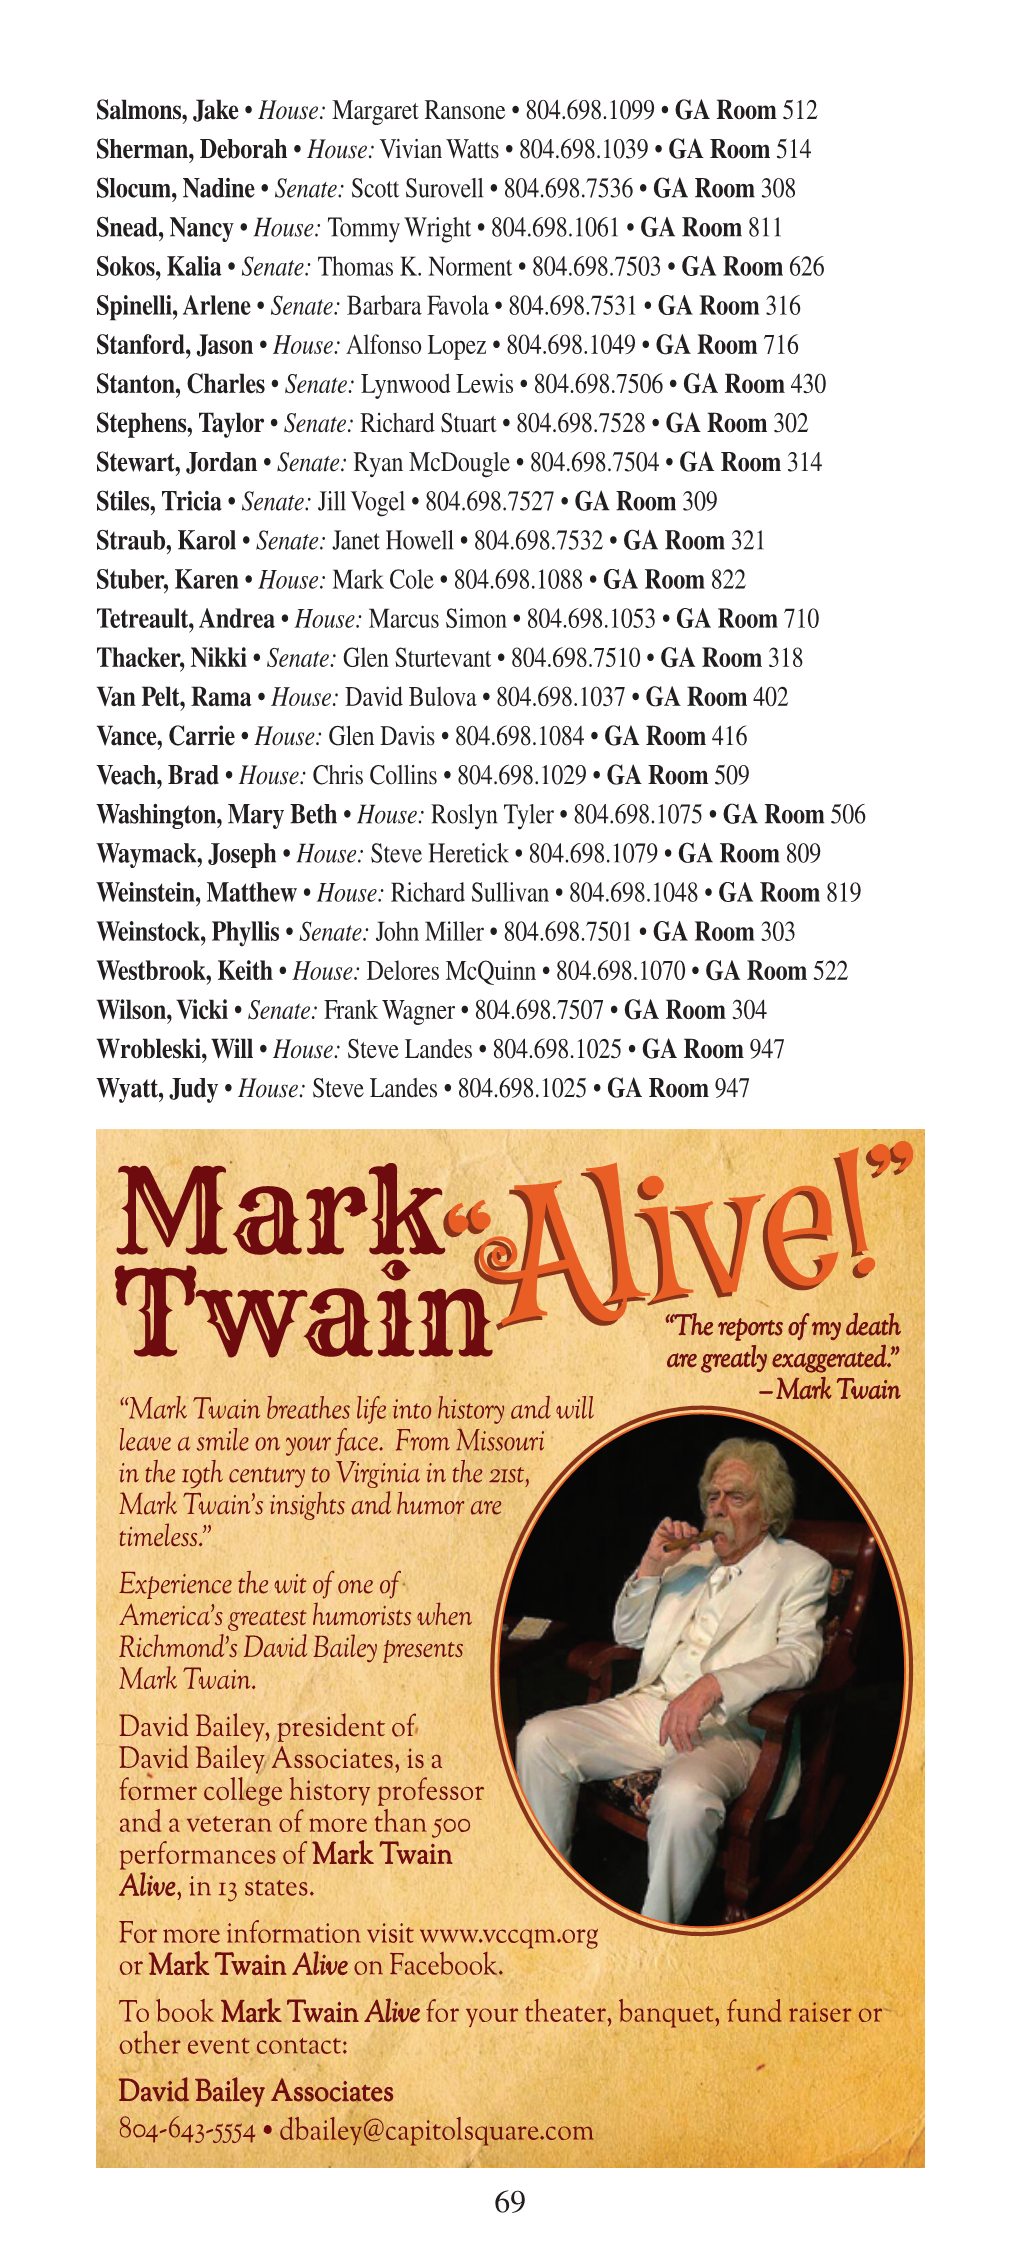 “Alive!”“Alive!”Are Greatly Exaggerated.” – Mark Twain “Mark Twain Breathes Life Into History and Will Leave a Smile on Your Face